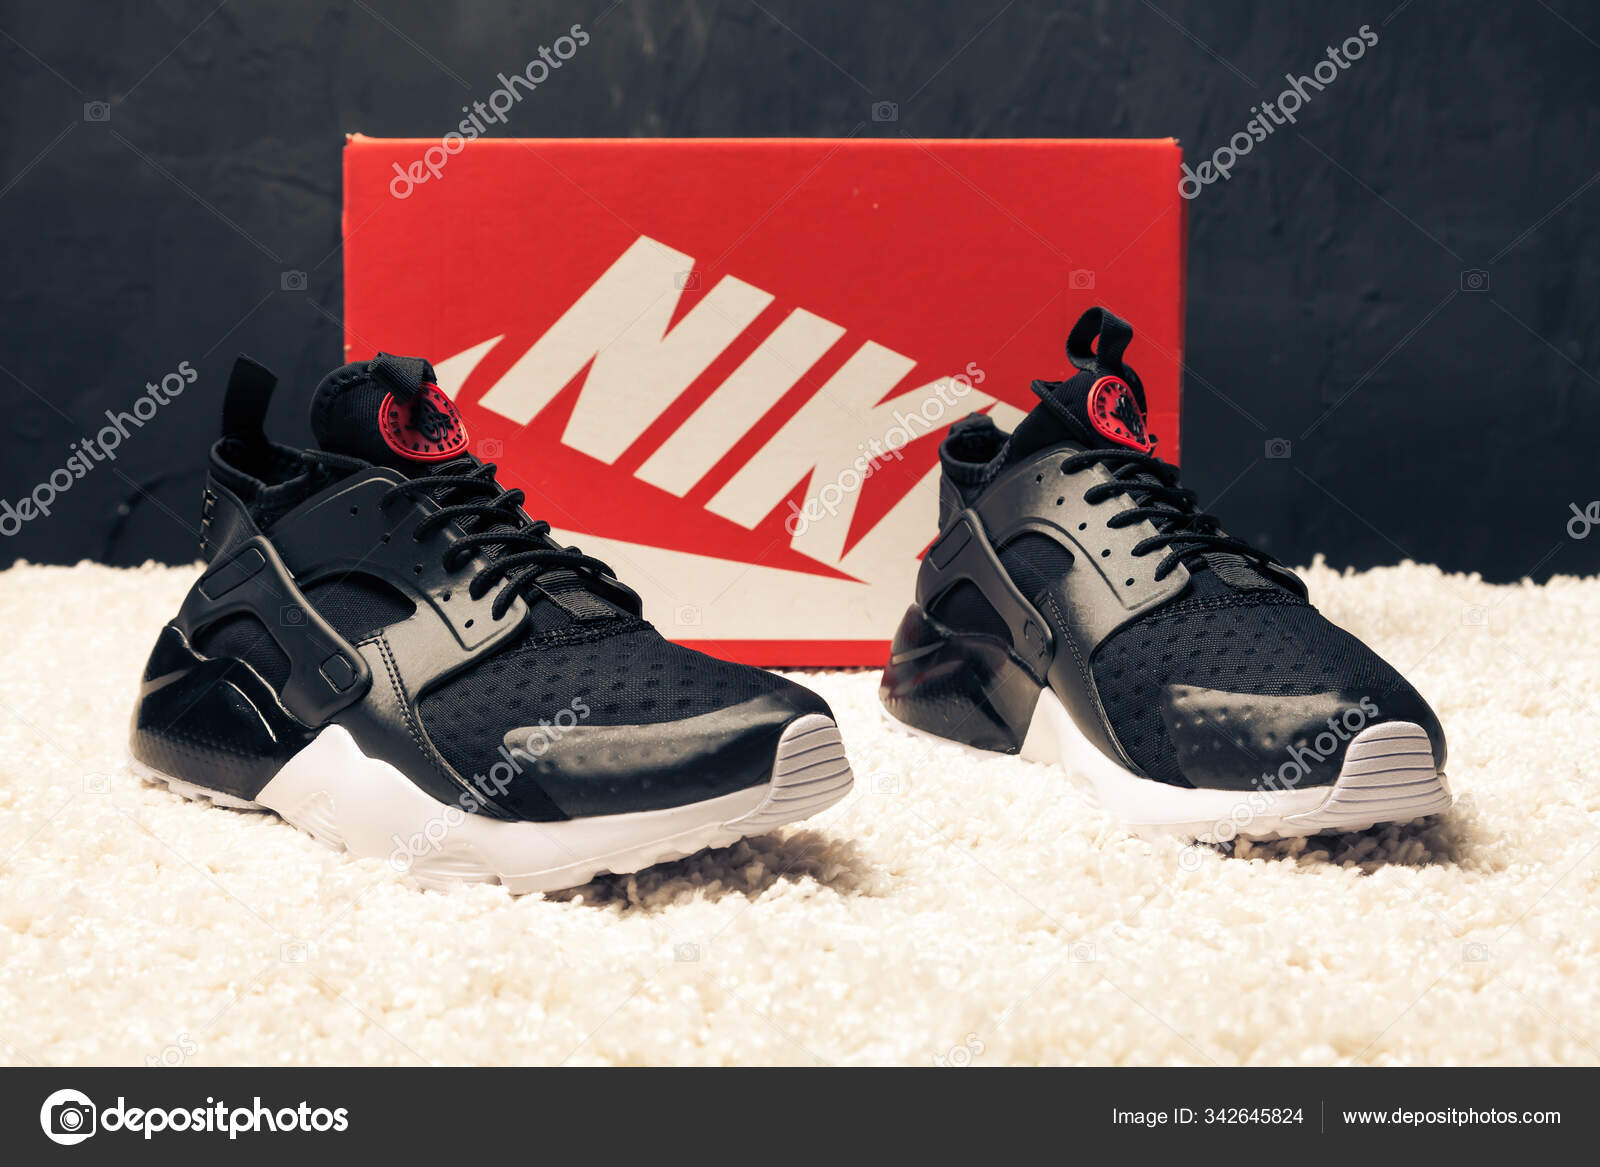 fire gange Ny ankomst boom New Beautiful Colorful Nice Nike Huarache Running Shoes Sneakers Trainers –  Stock Editorial Photo © sozon #342645824